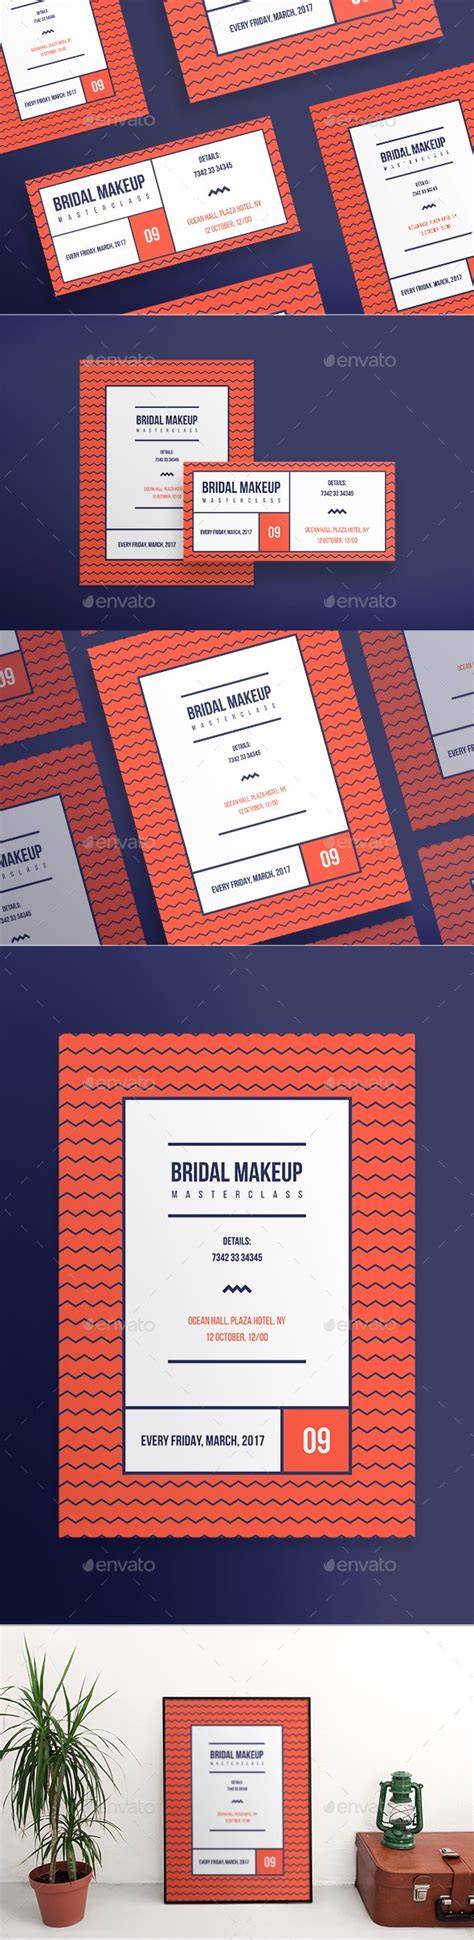 Bridal Makeup Flyers By Ambergraphics Graphicriver